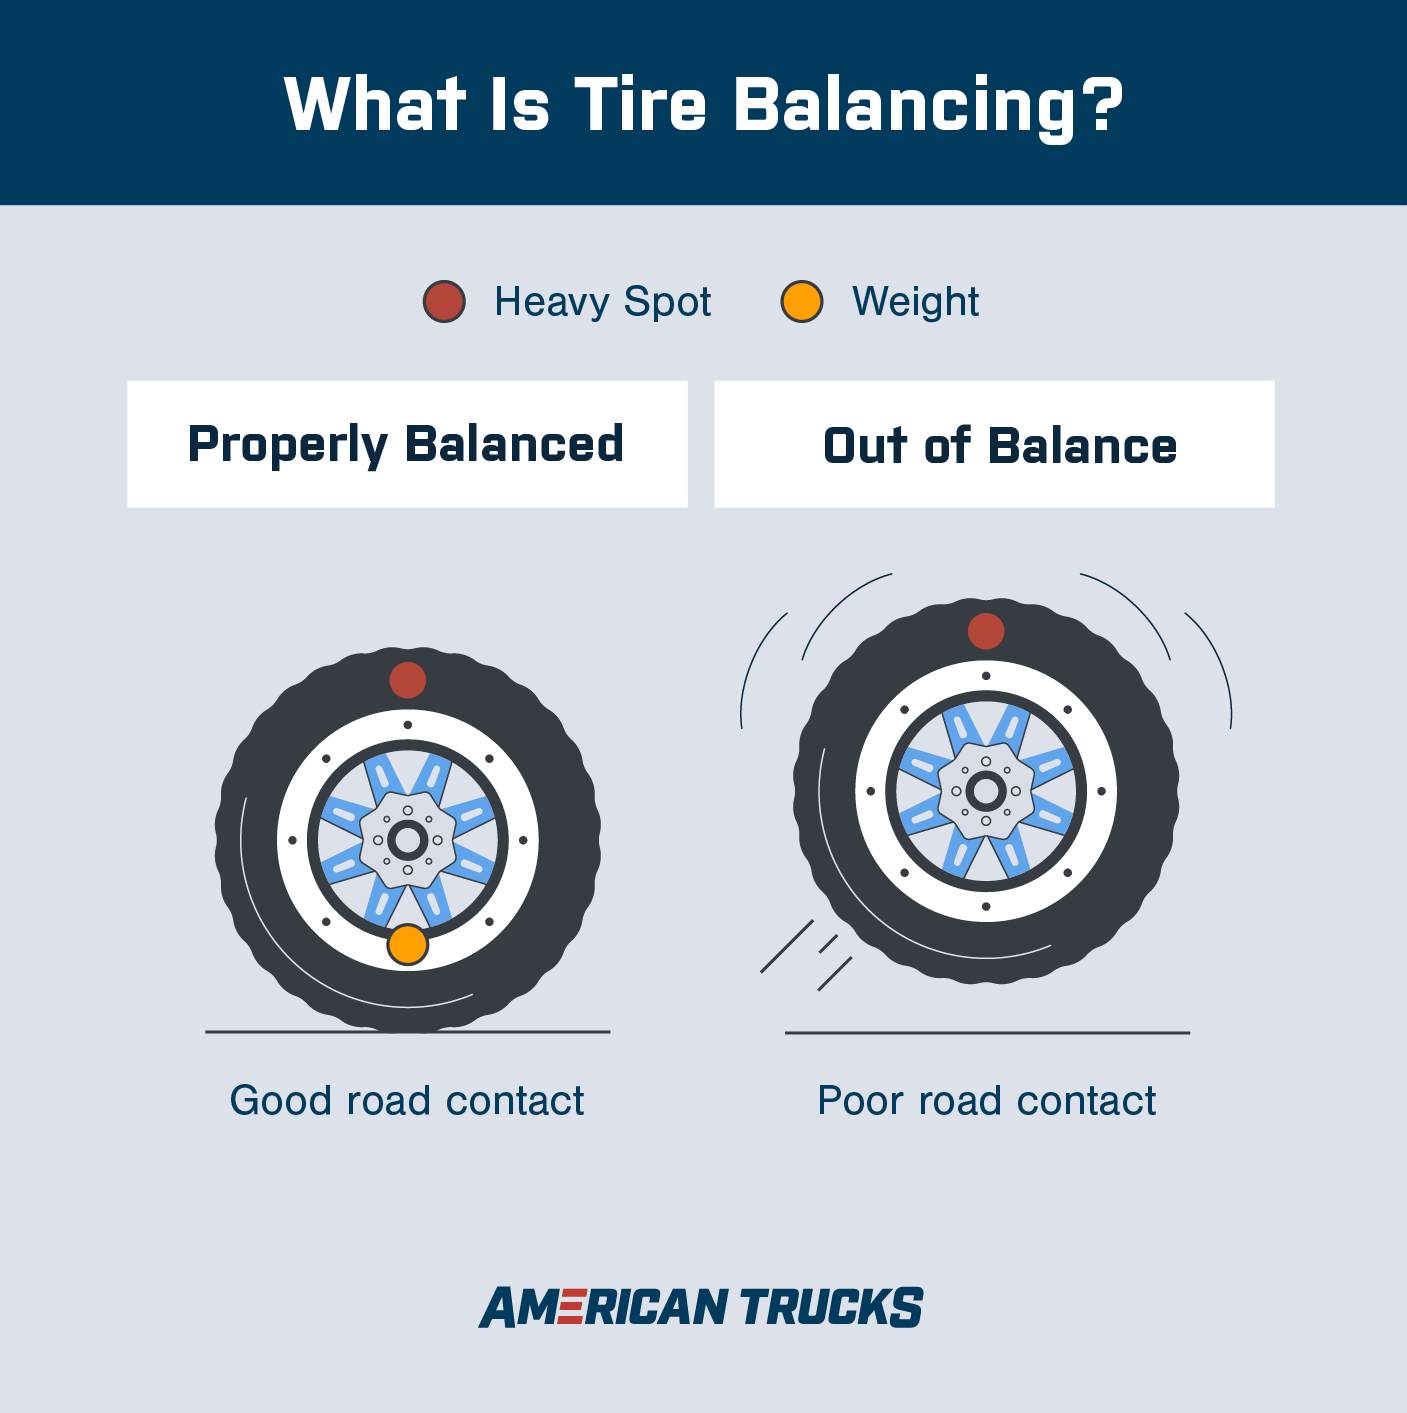 Graphic of two tires demonstrating which indicates a tire needs balancing, with one labeled "properly balanced" and one labeled "out of balance".